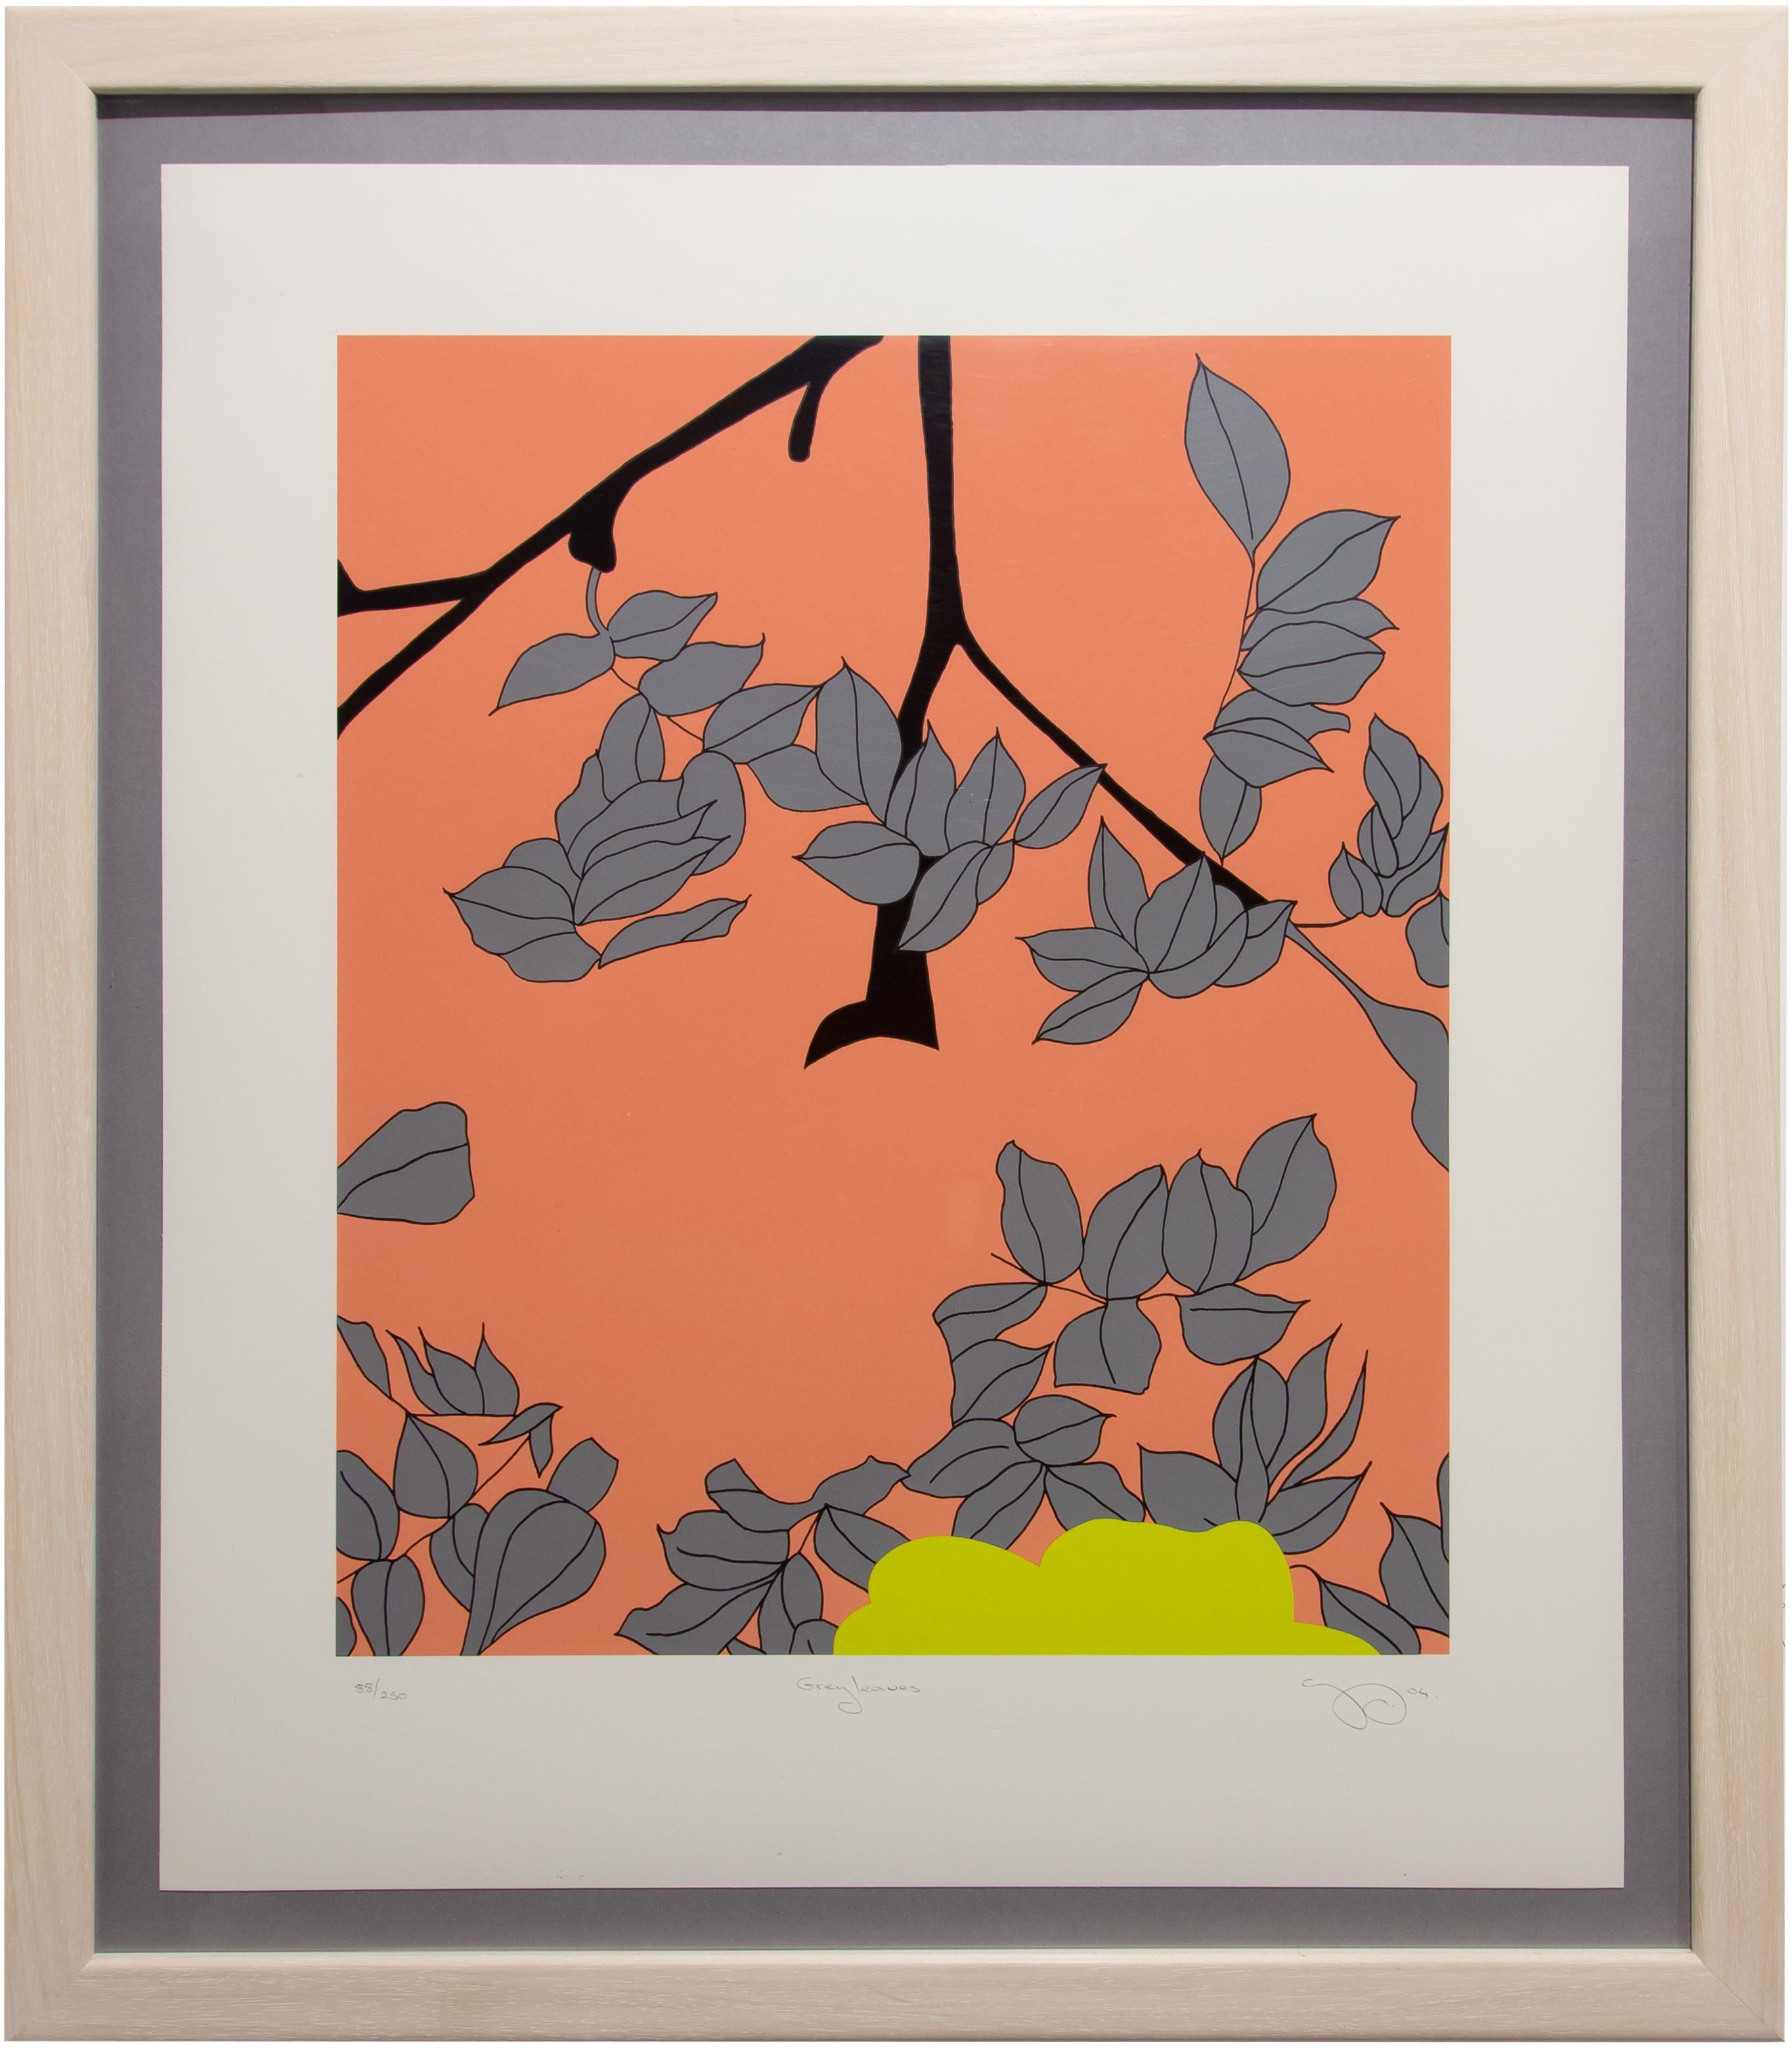 Grey Leaves - Print by Gary Hume